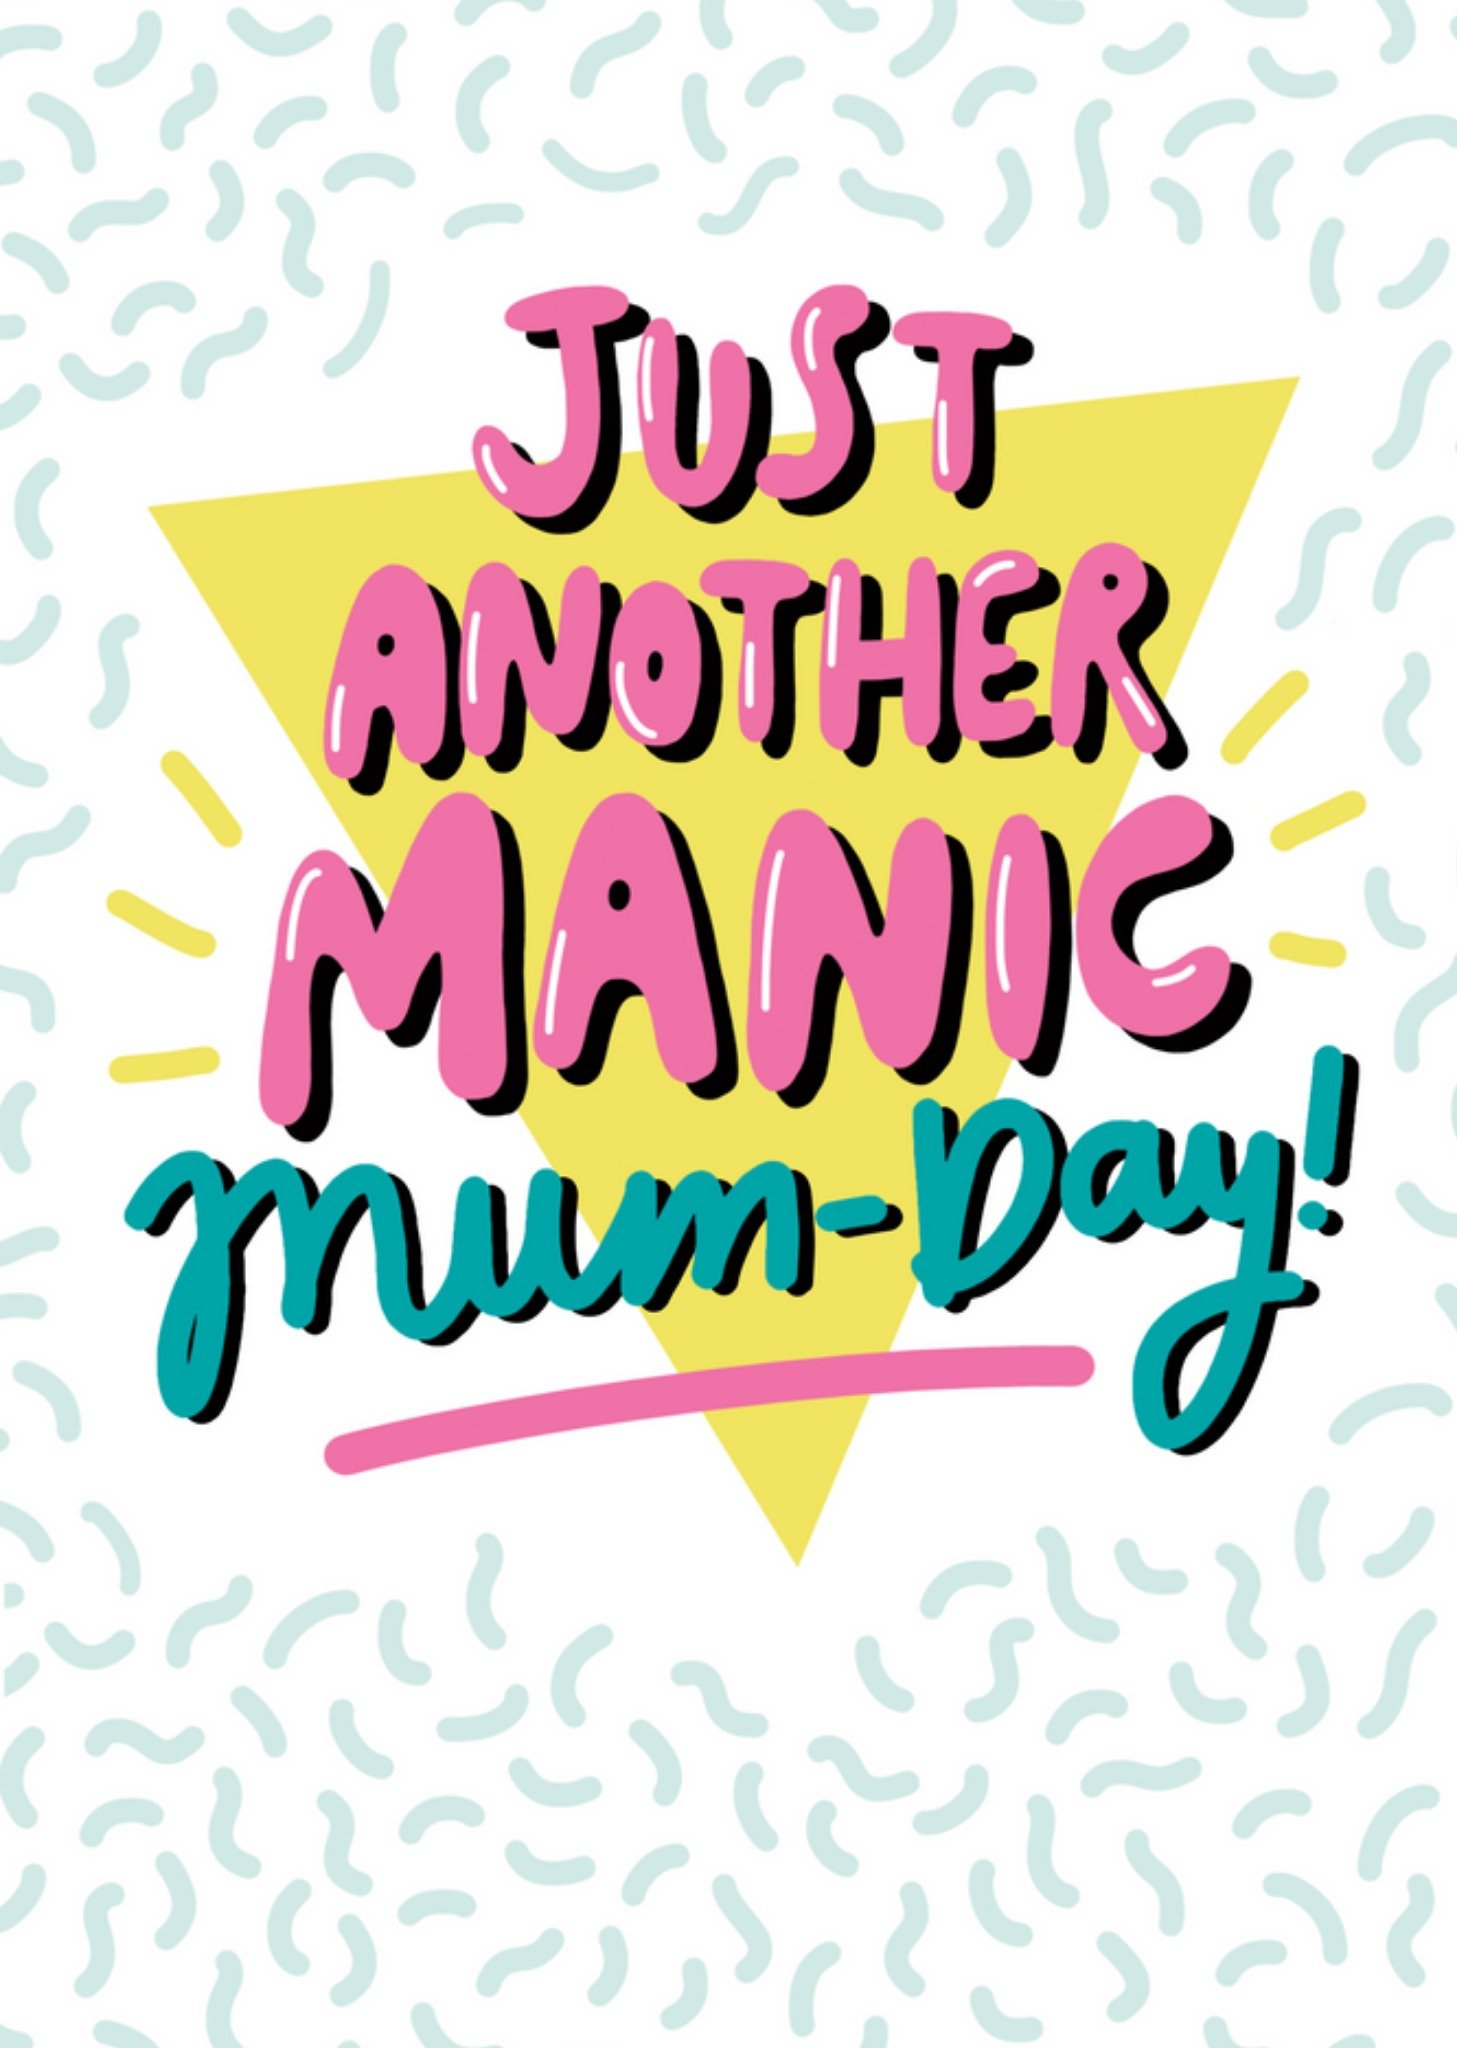 Moonpig Ukg Just Another Manic Mum-Day Retro Typography Mother's Day Card, Large